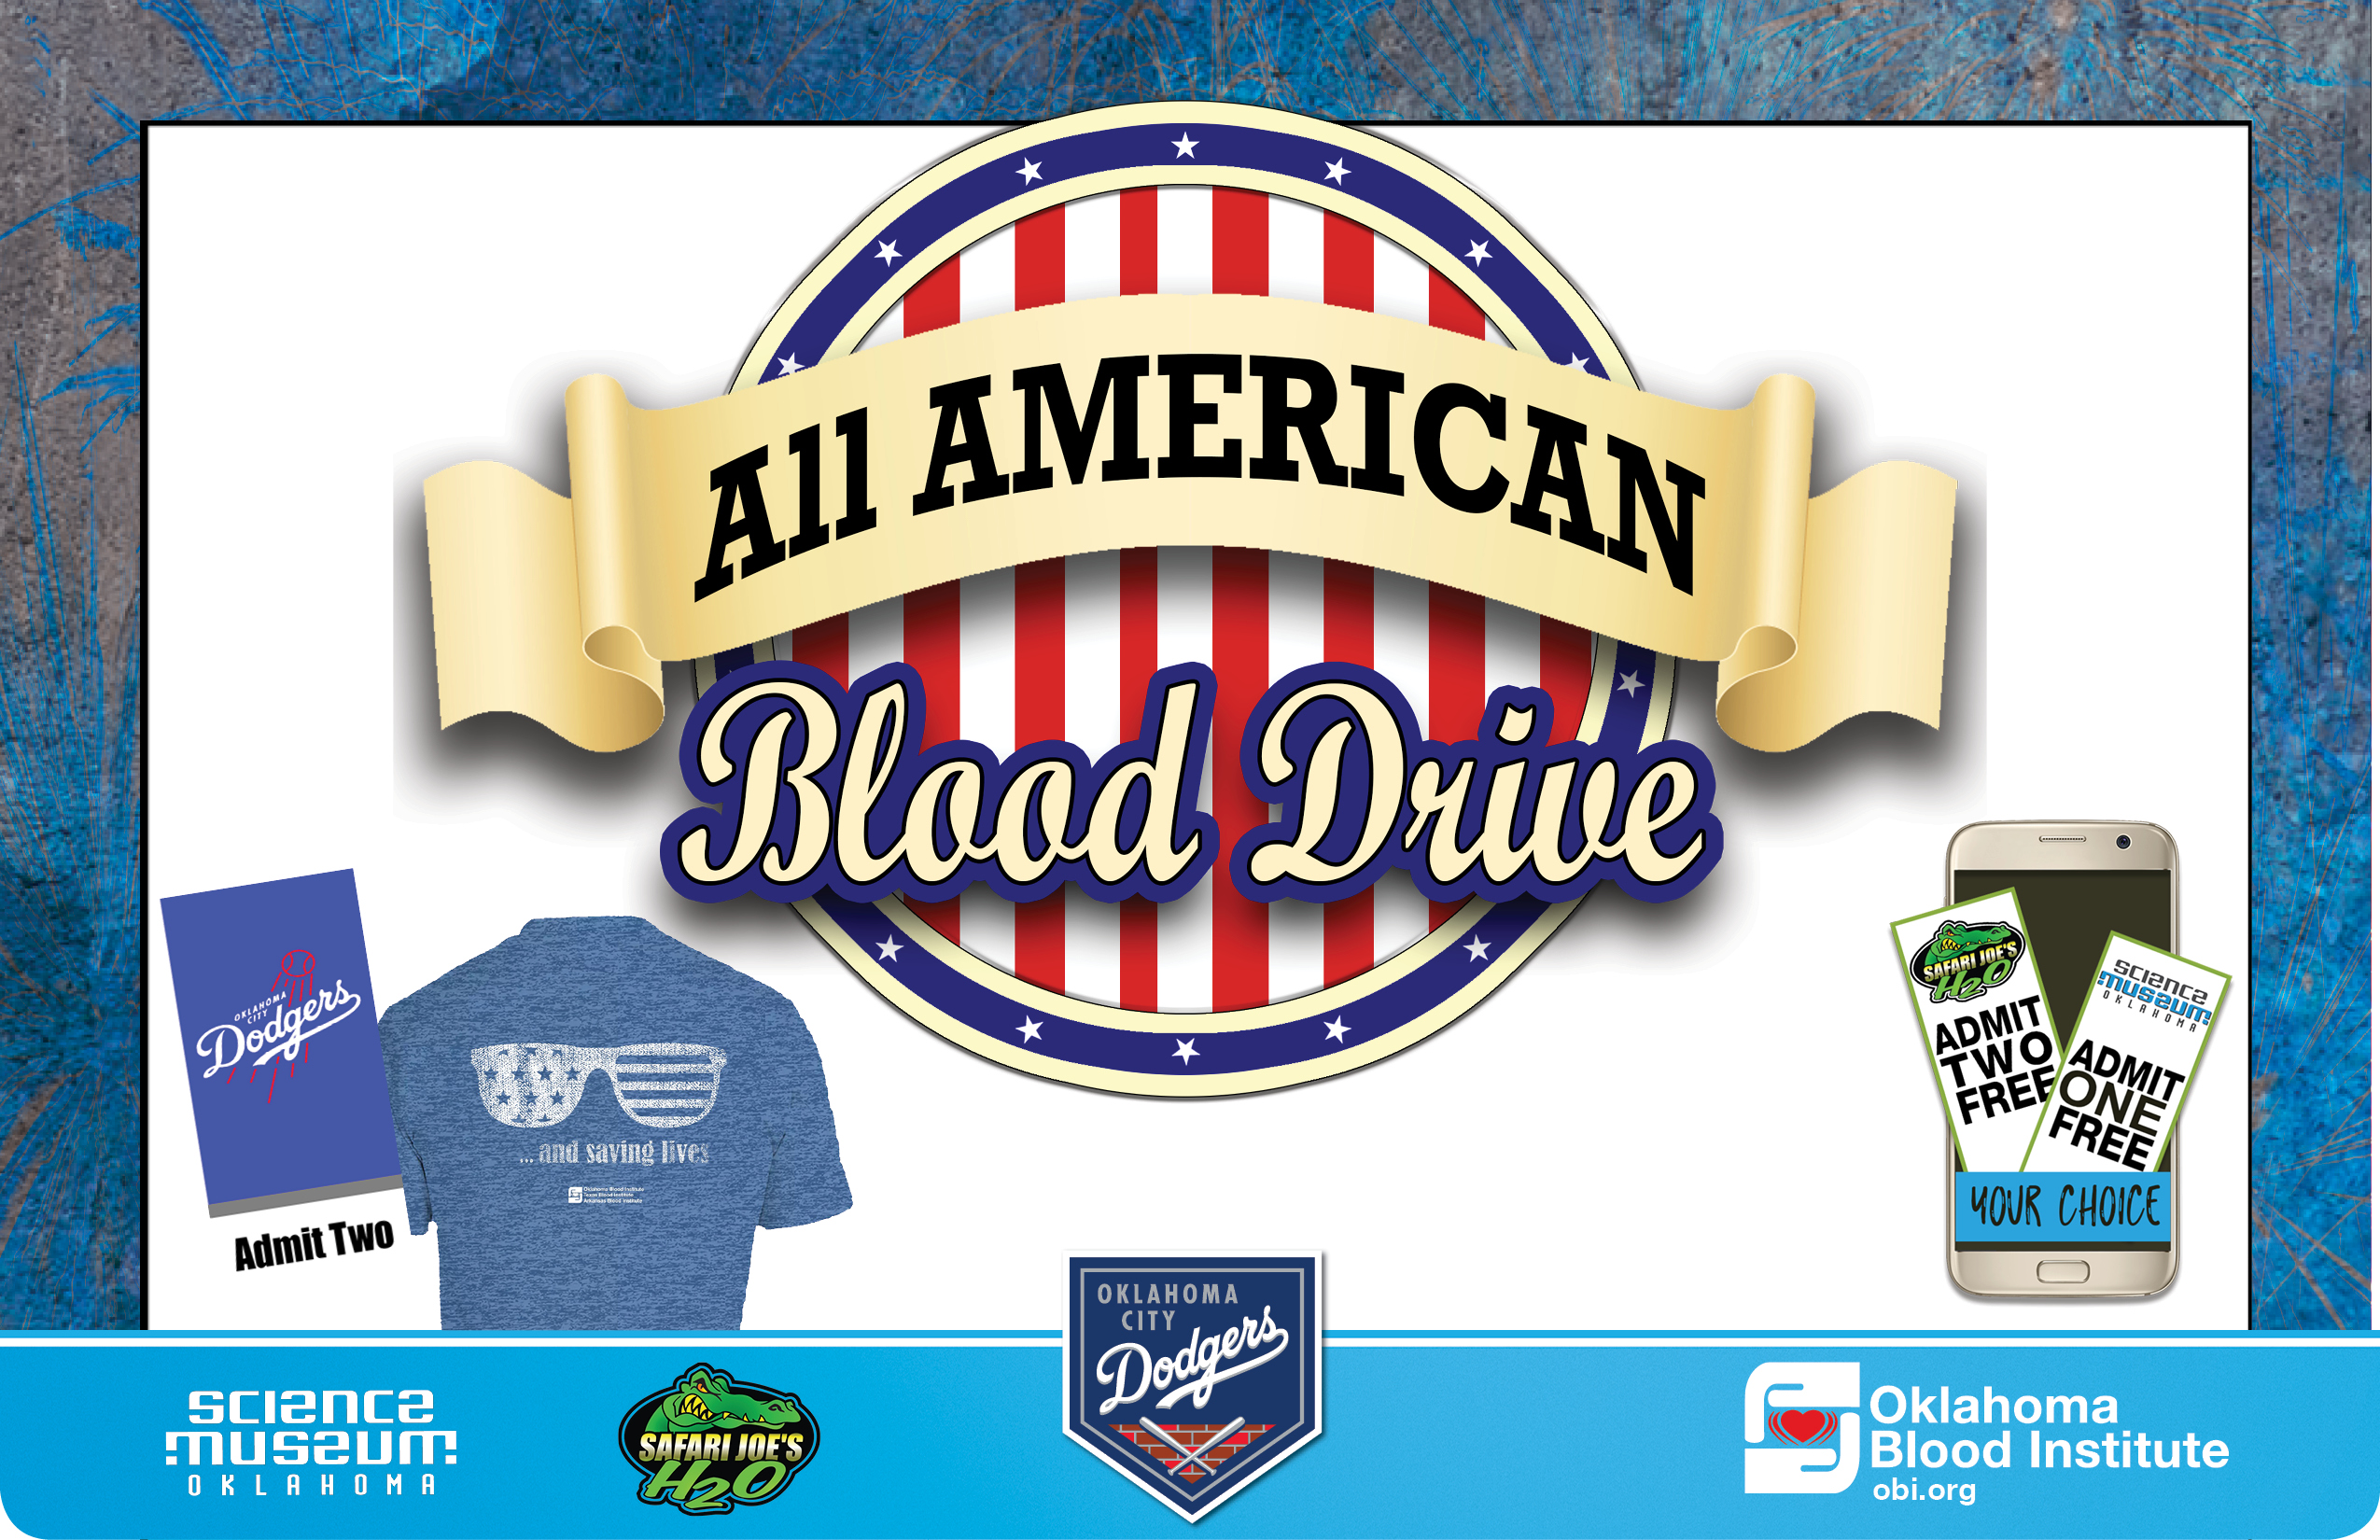 Ponca City Fish Fry Event to host All-American Blood Drive June 28 